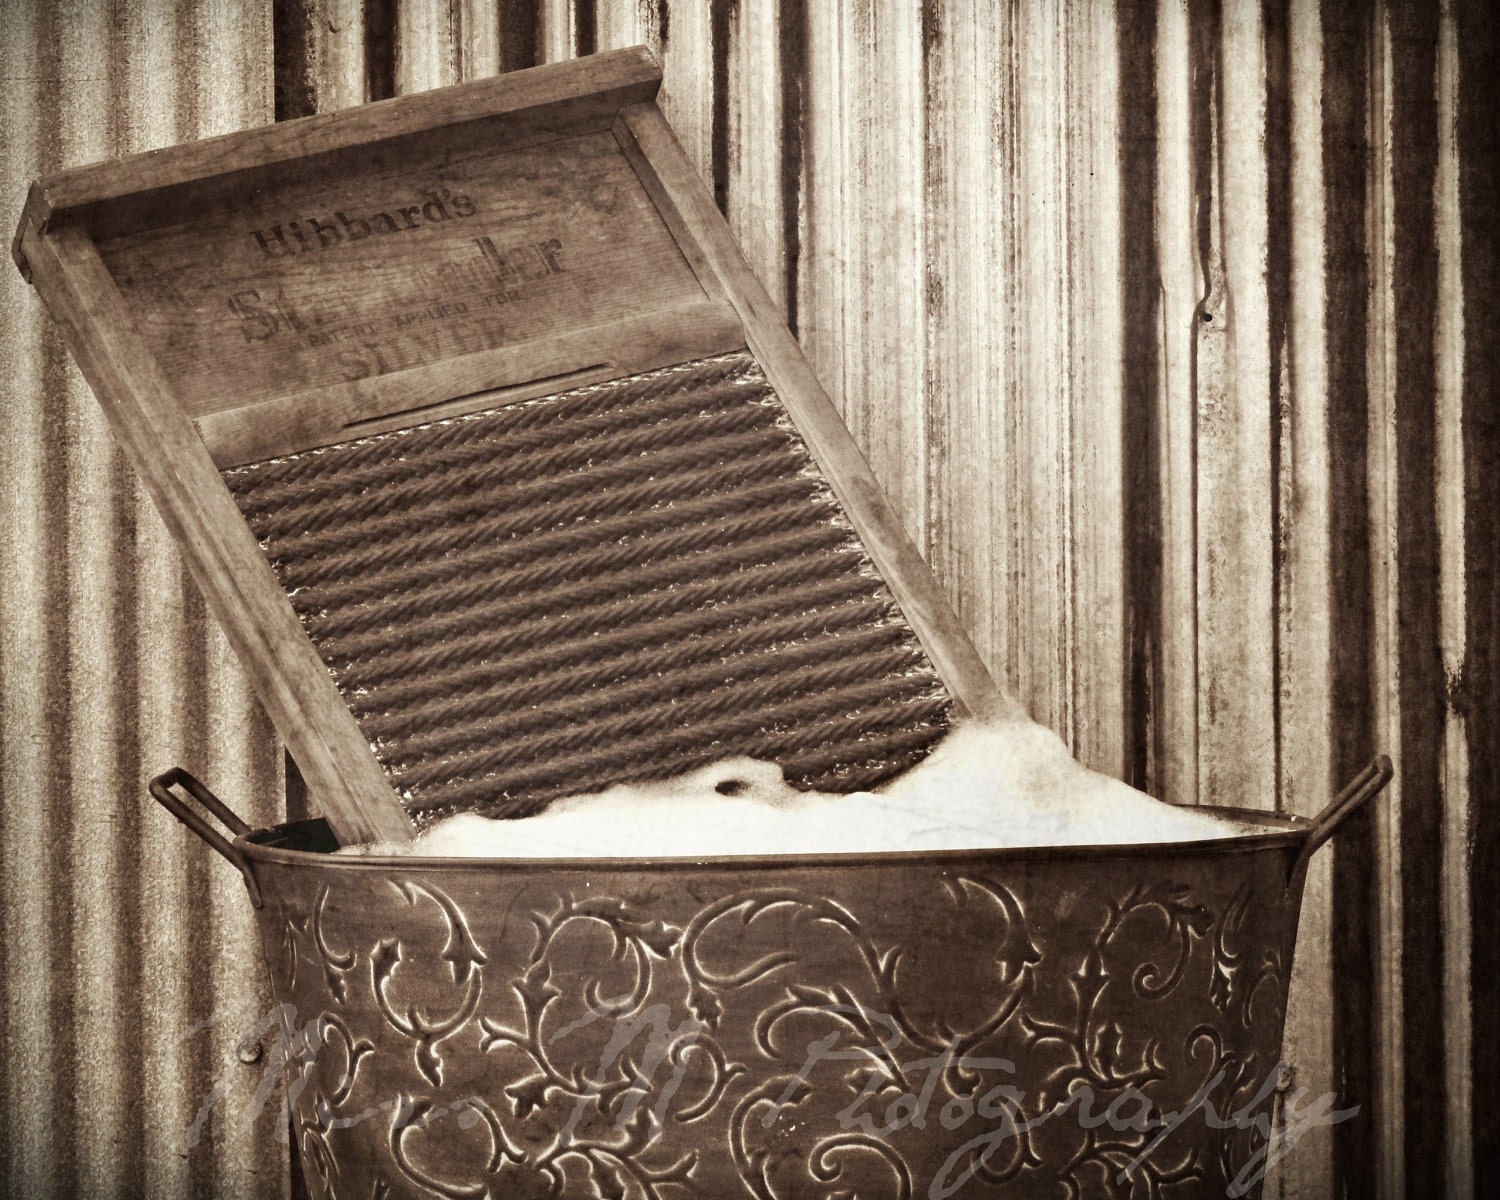 Vintage, rustic, sepia brown, laundry washboard, wash day, country/farmhouse home decor, original fine art photograph, 8x10 print